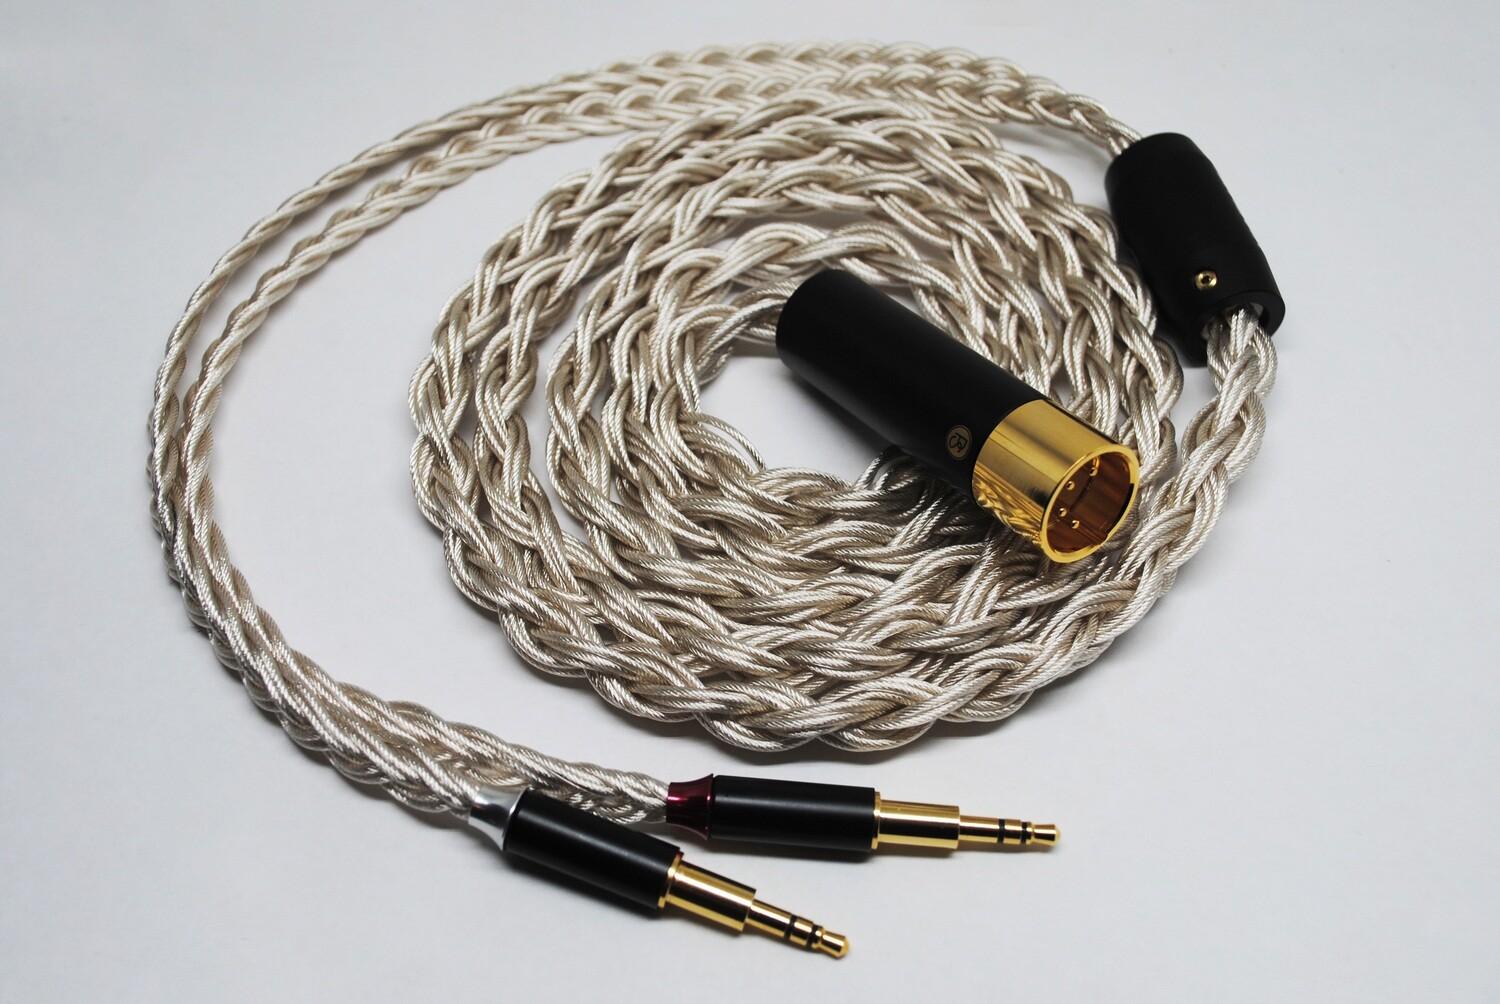 X16 Series Custom Cable for Headphones